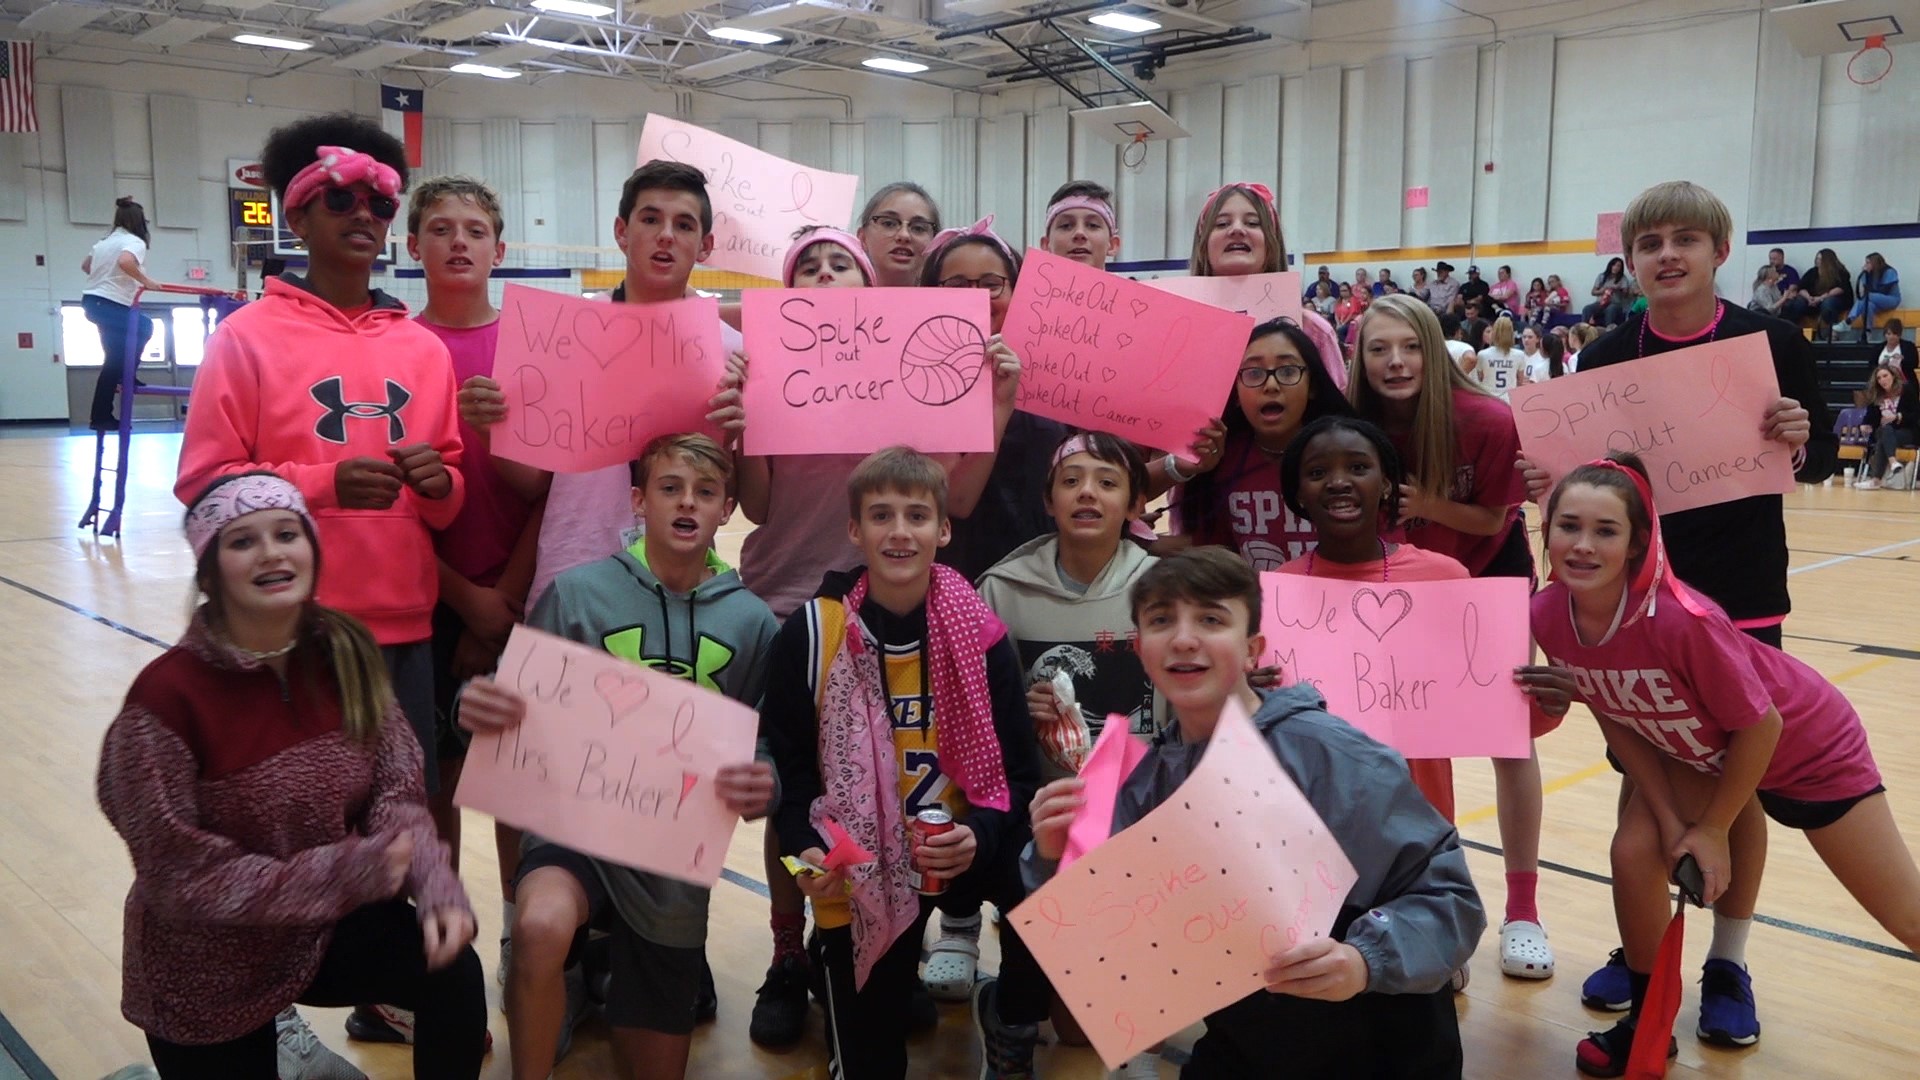 Wylie Junior High strikes out cancer for DeeDee Baker.